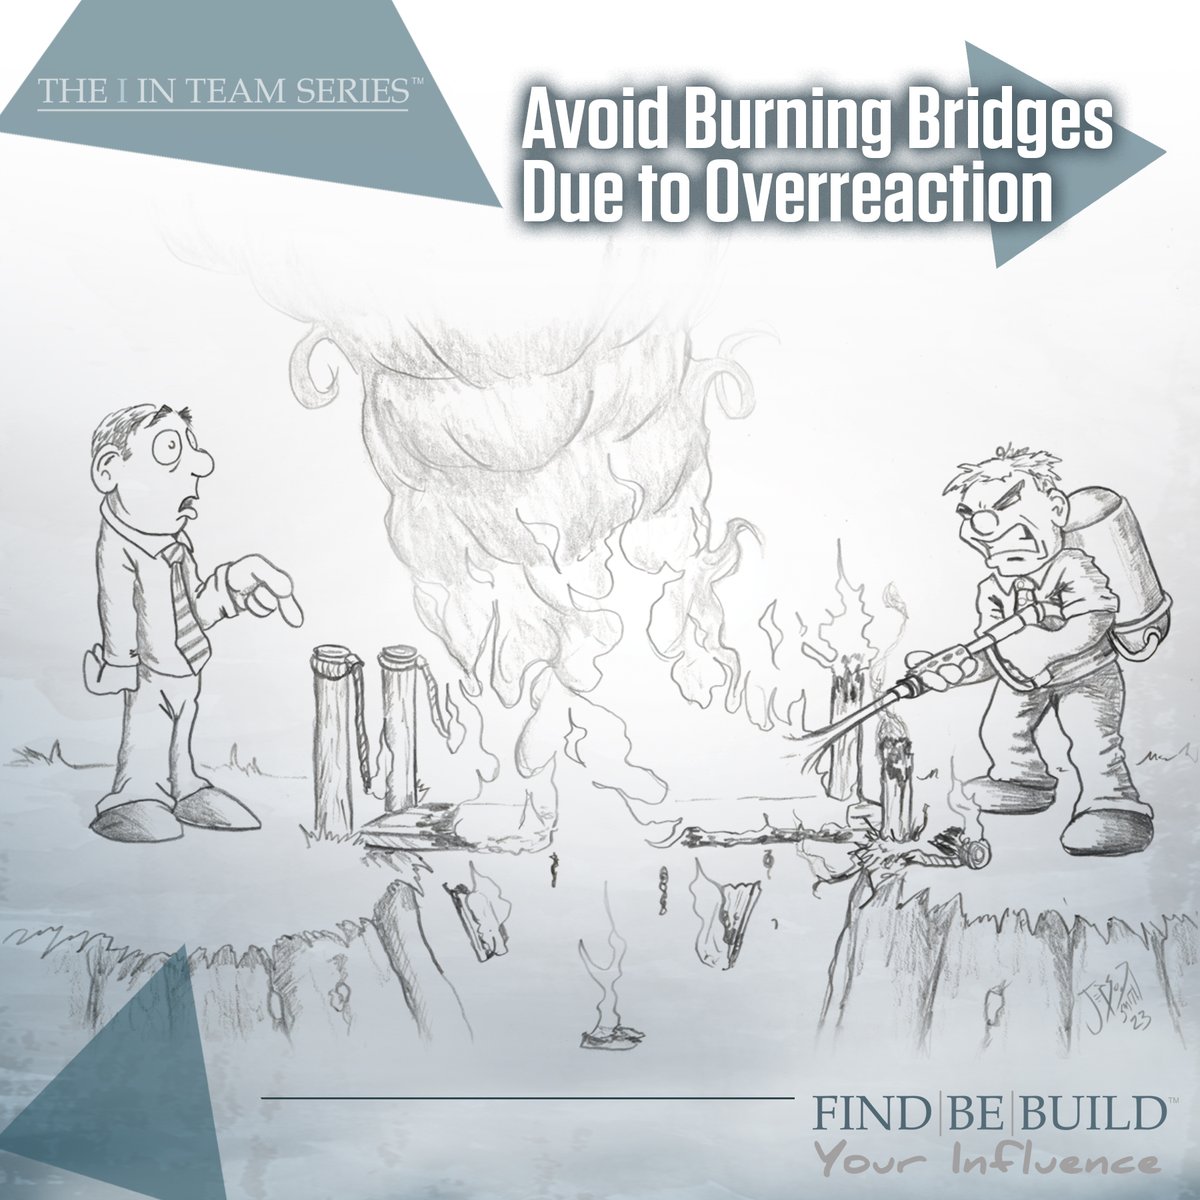 As discussed in Positive Influence, burning bridges due to overreaction is a huge pitfall. Read more in our blog: 
iabusinessadvisors.com/avoid-burining…
#amazonbook #positiveinfluence #inspiringchange #spreadkindness #makeadifference #mindsetmatters#blogpost #blogger#selfimprovement